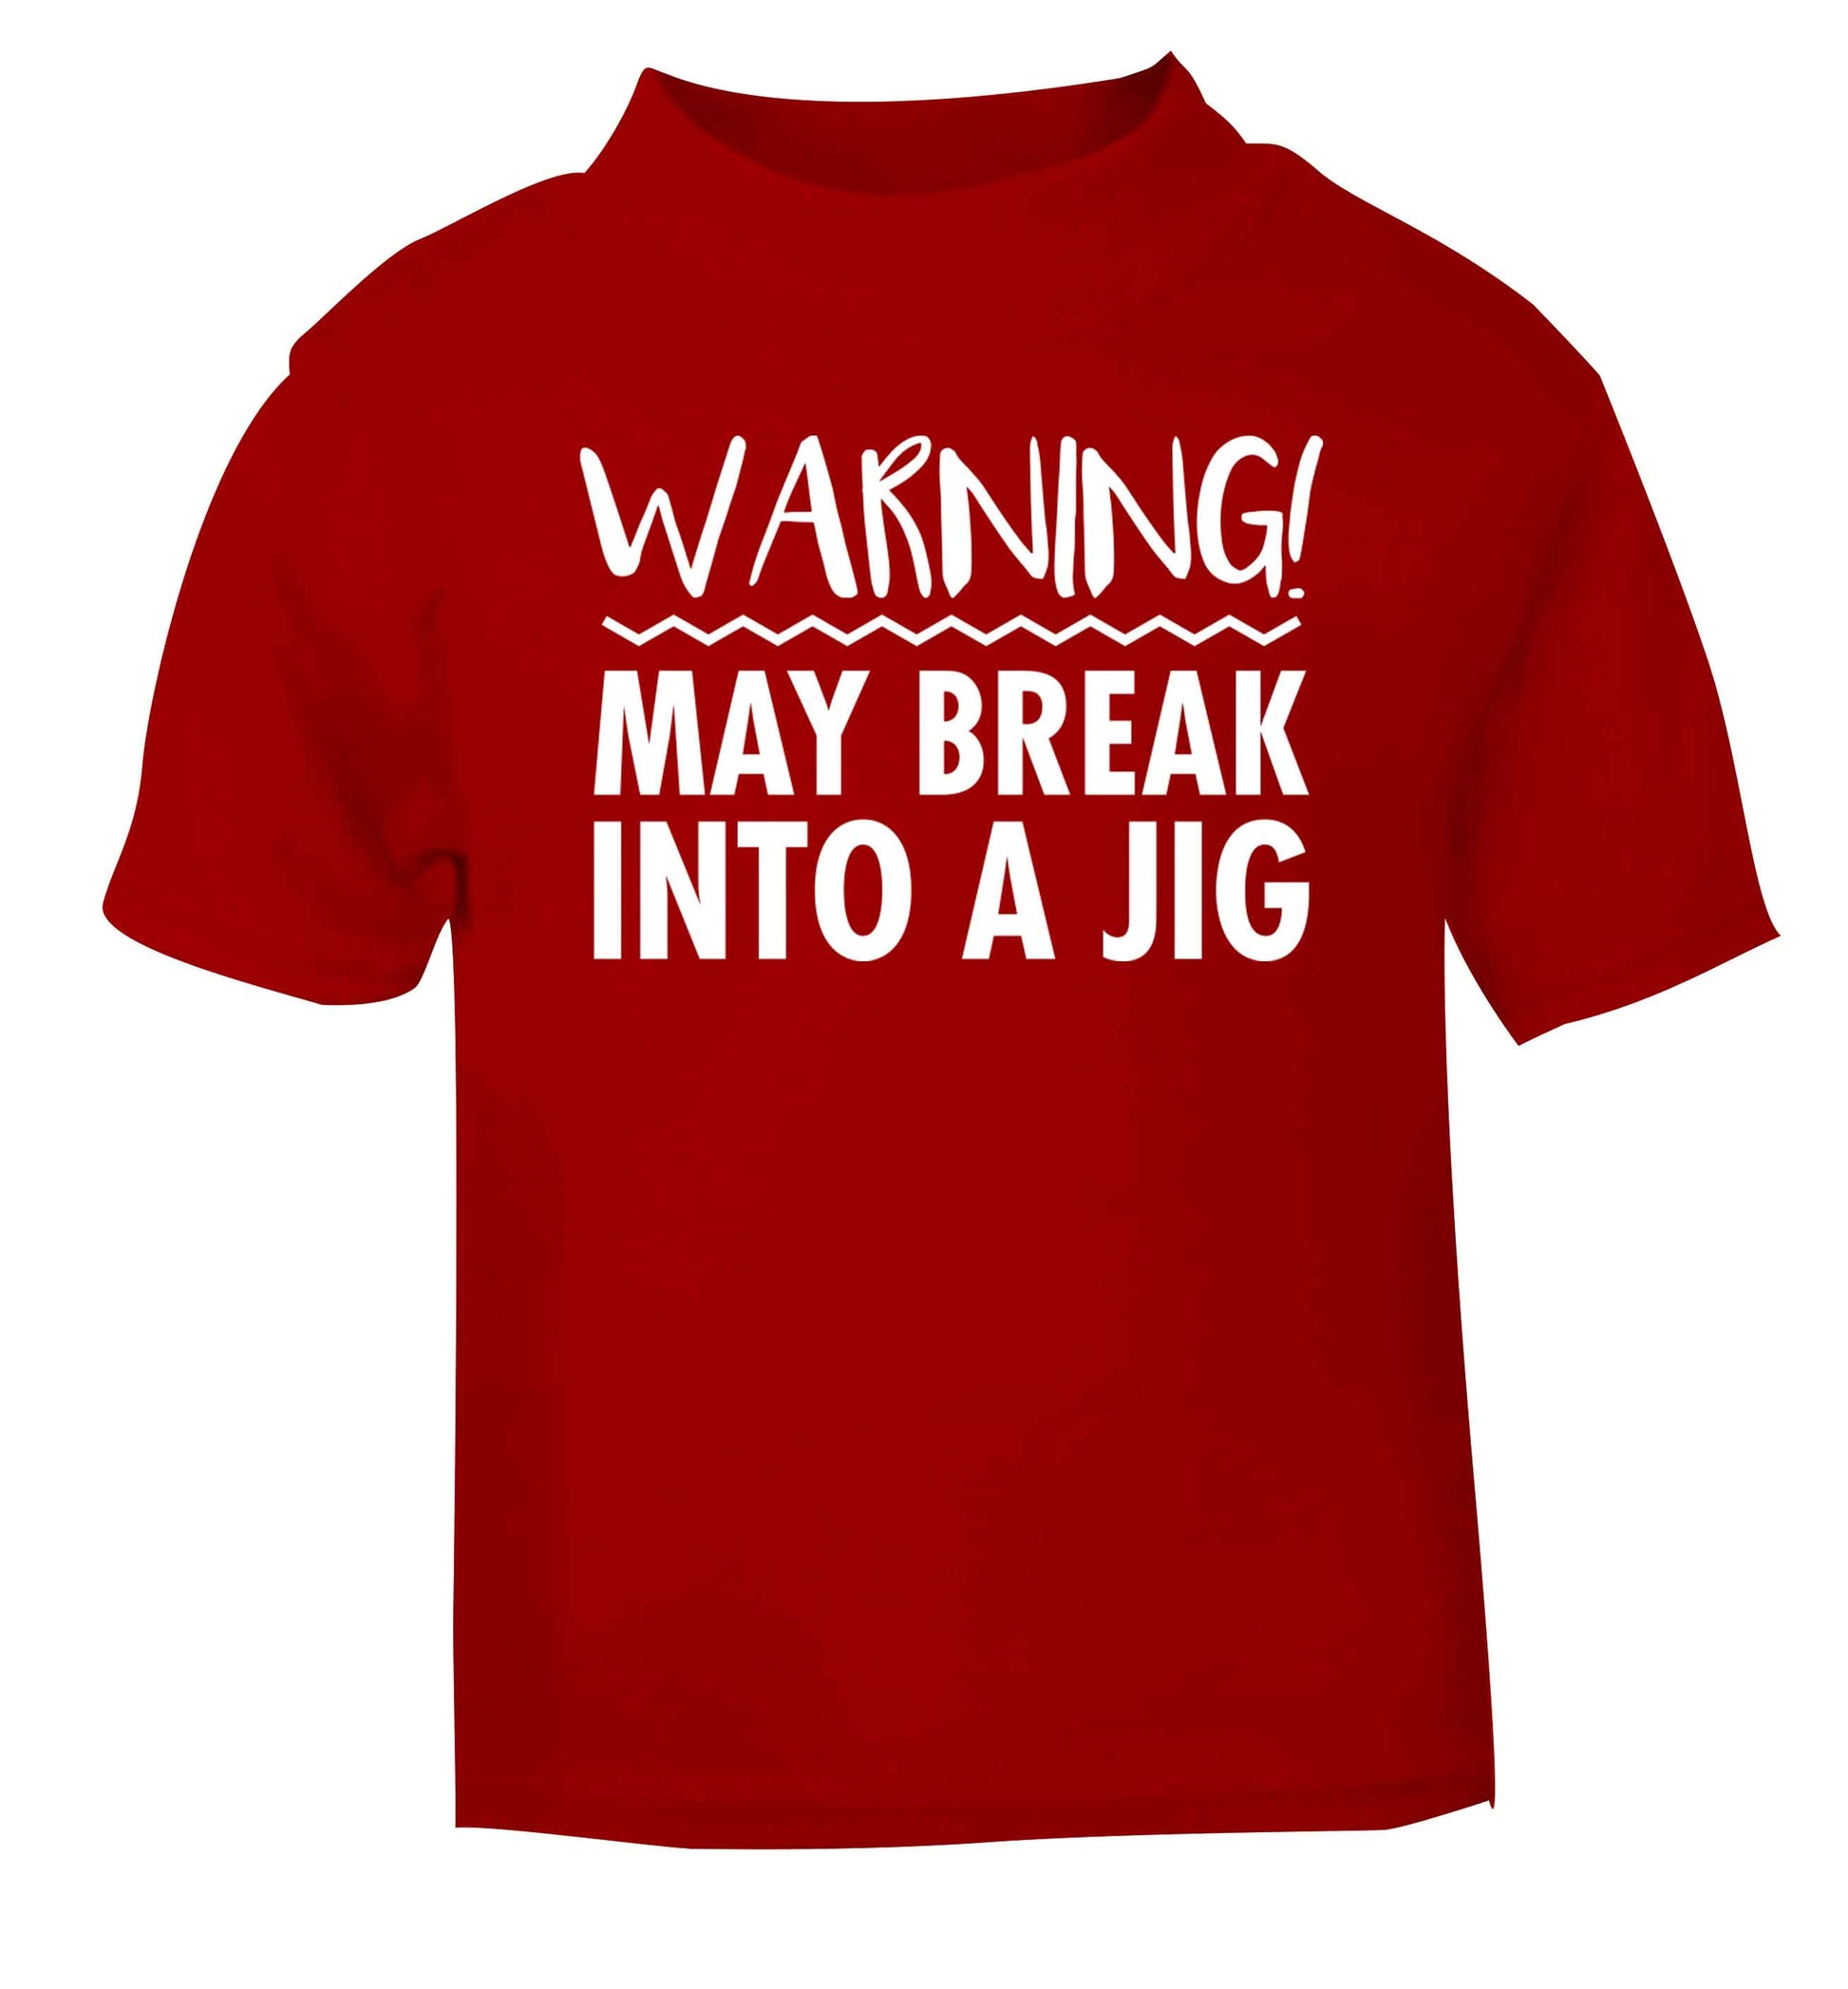 Warning may break into a jig red baby toddler Tshirt 2 Years